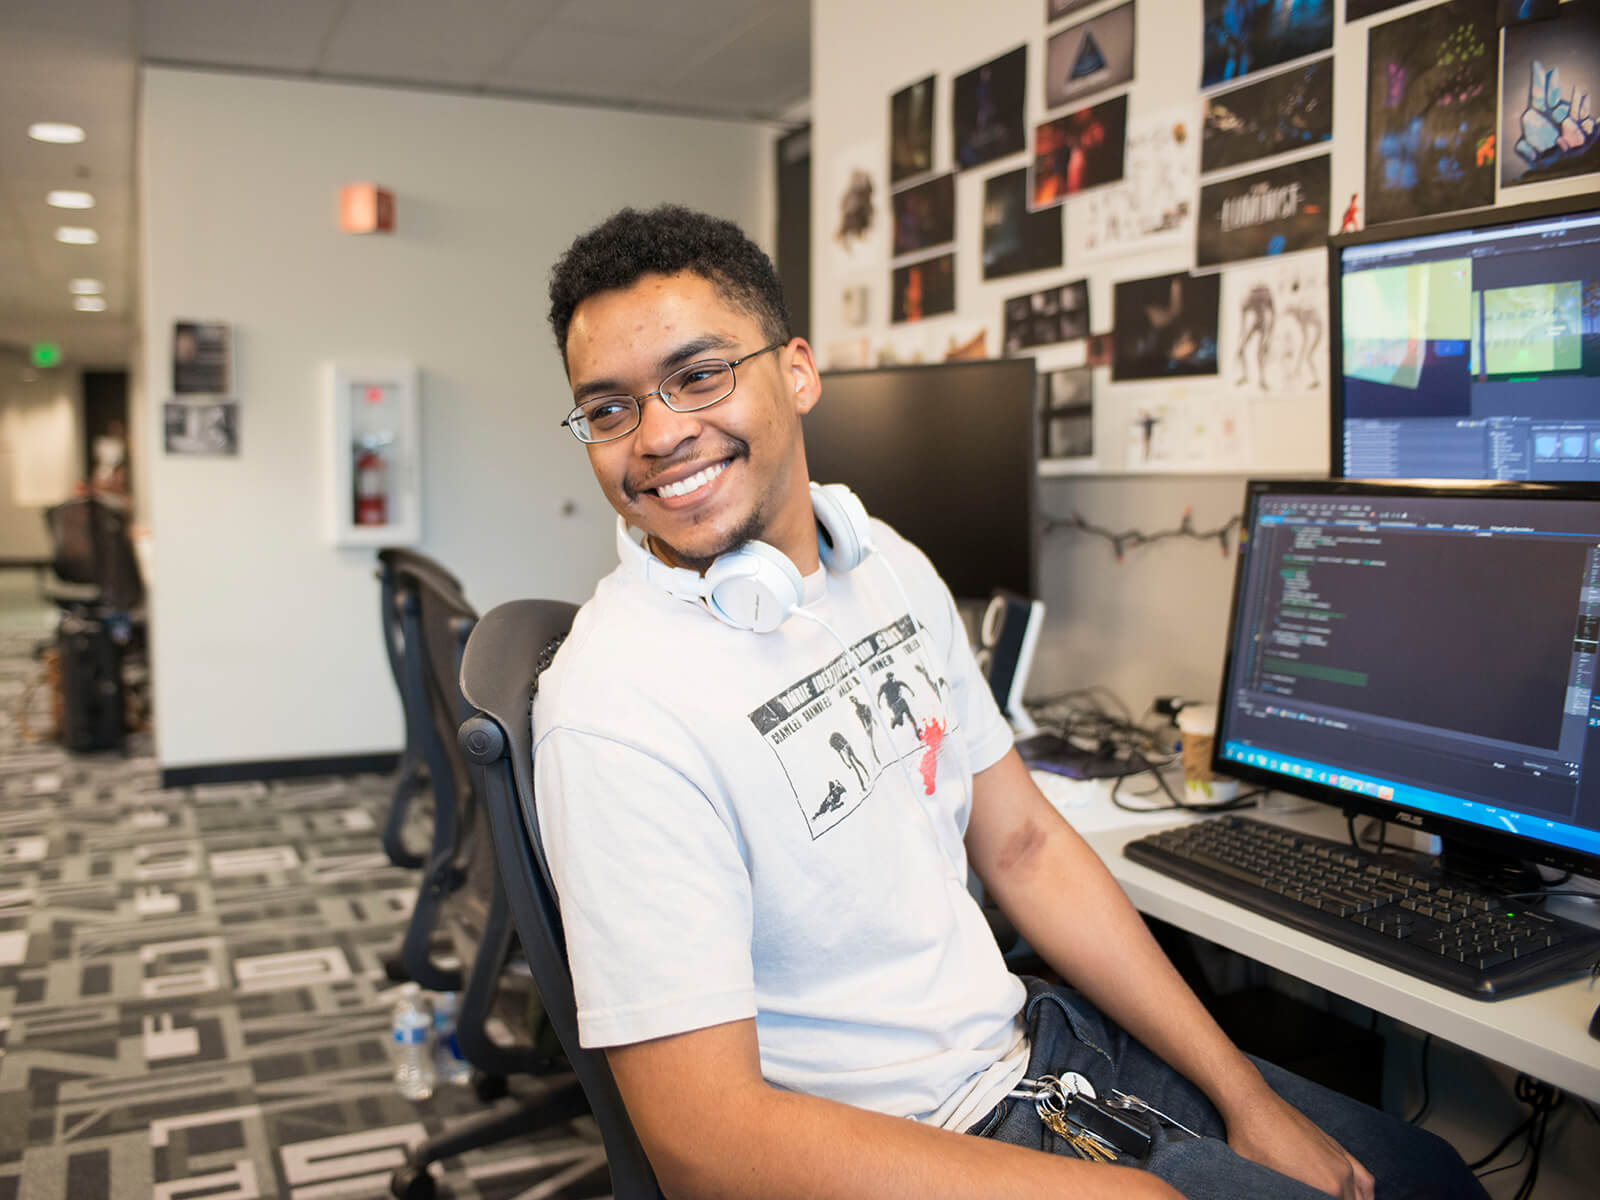 A DigiPen student smiling as he leans away from a computer screen